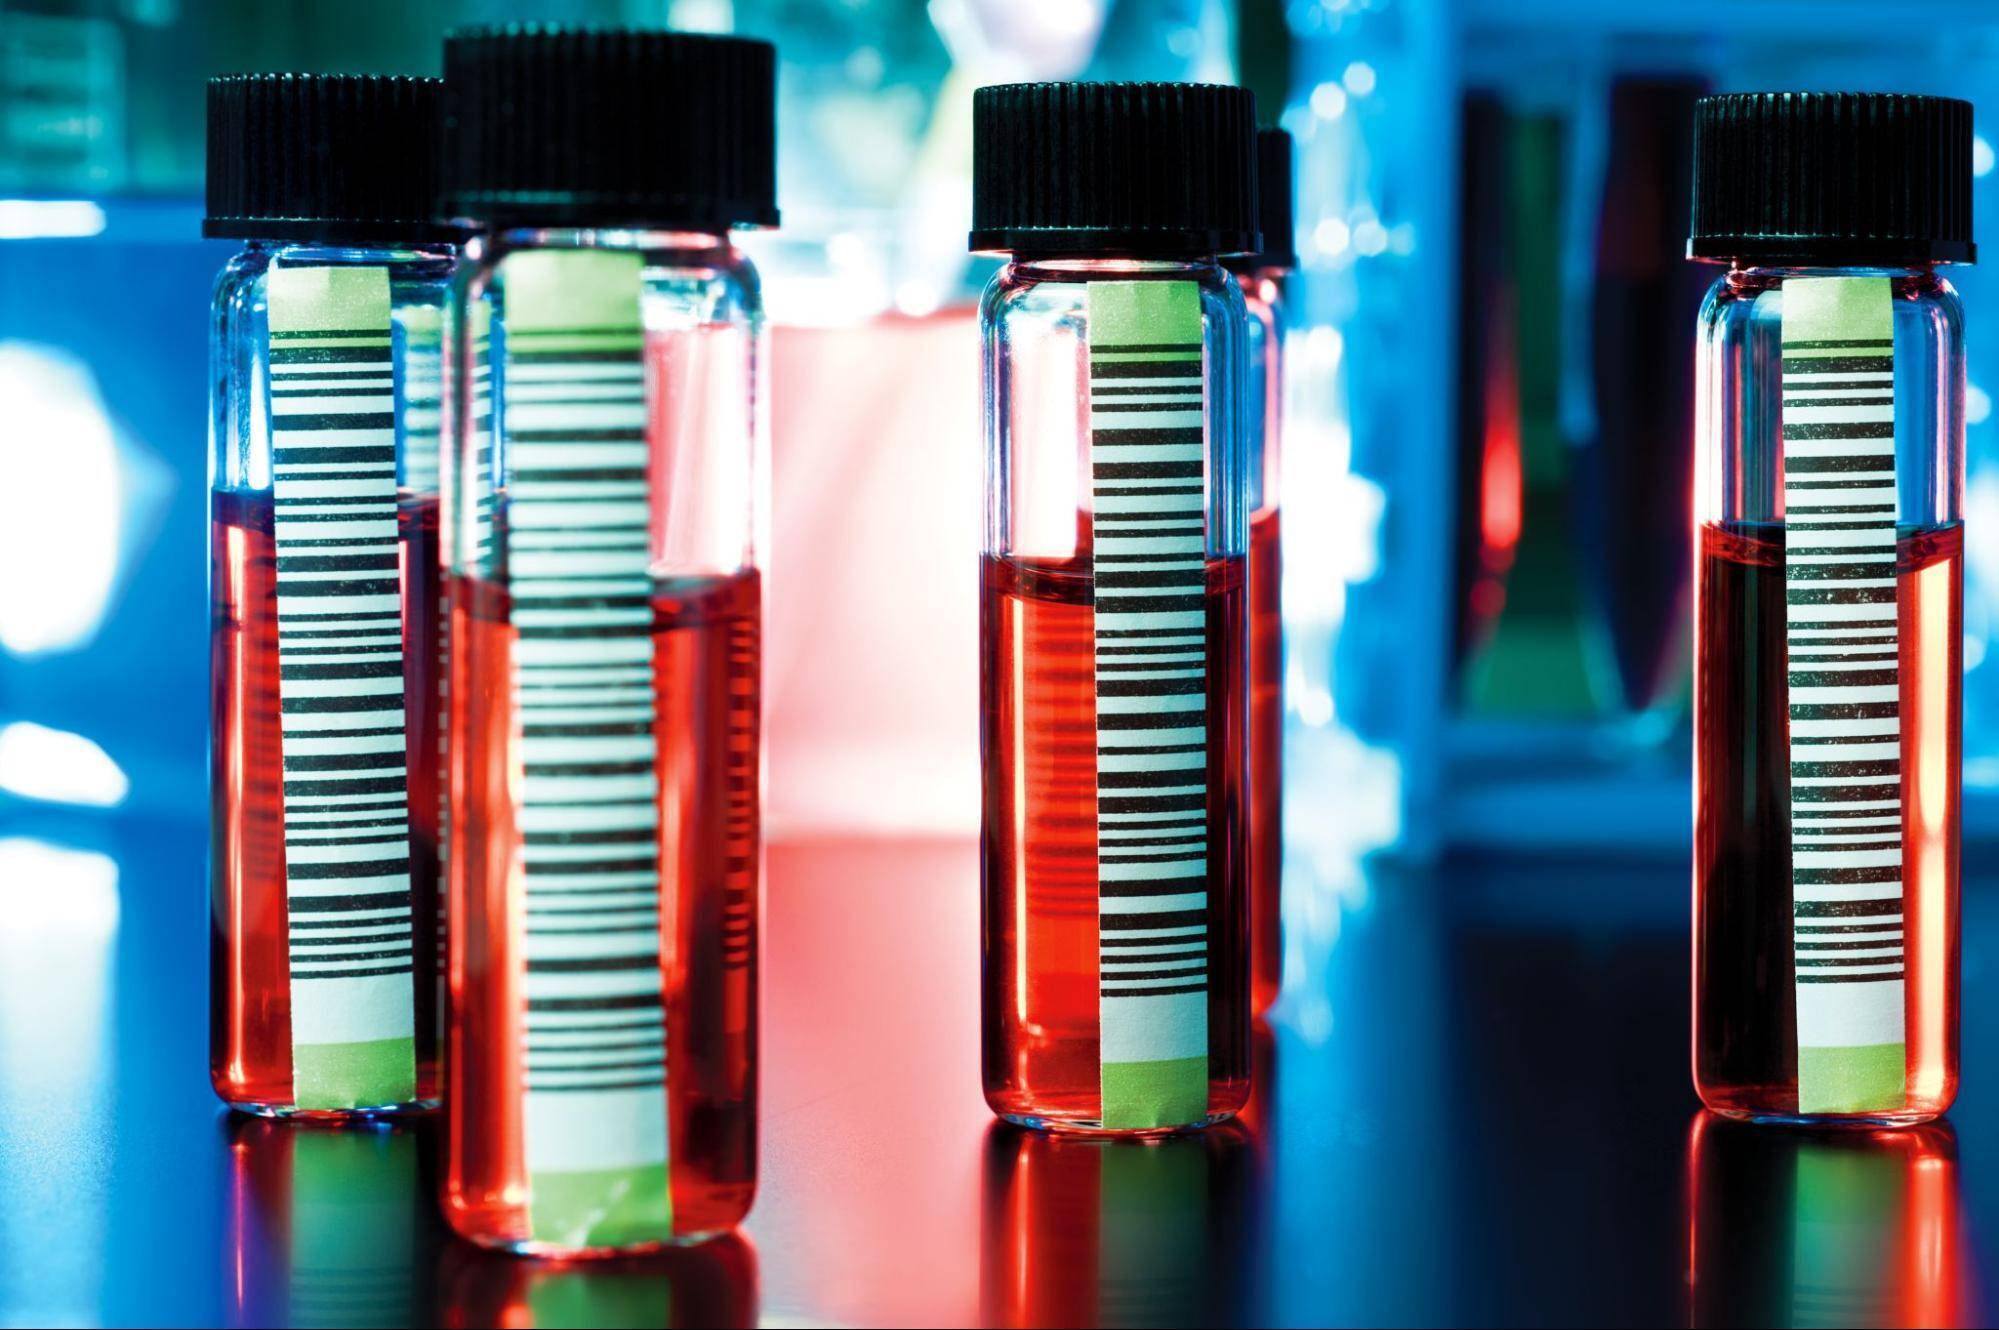 Barcodes on Pharmaceutical Vials